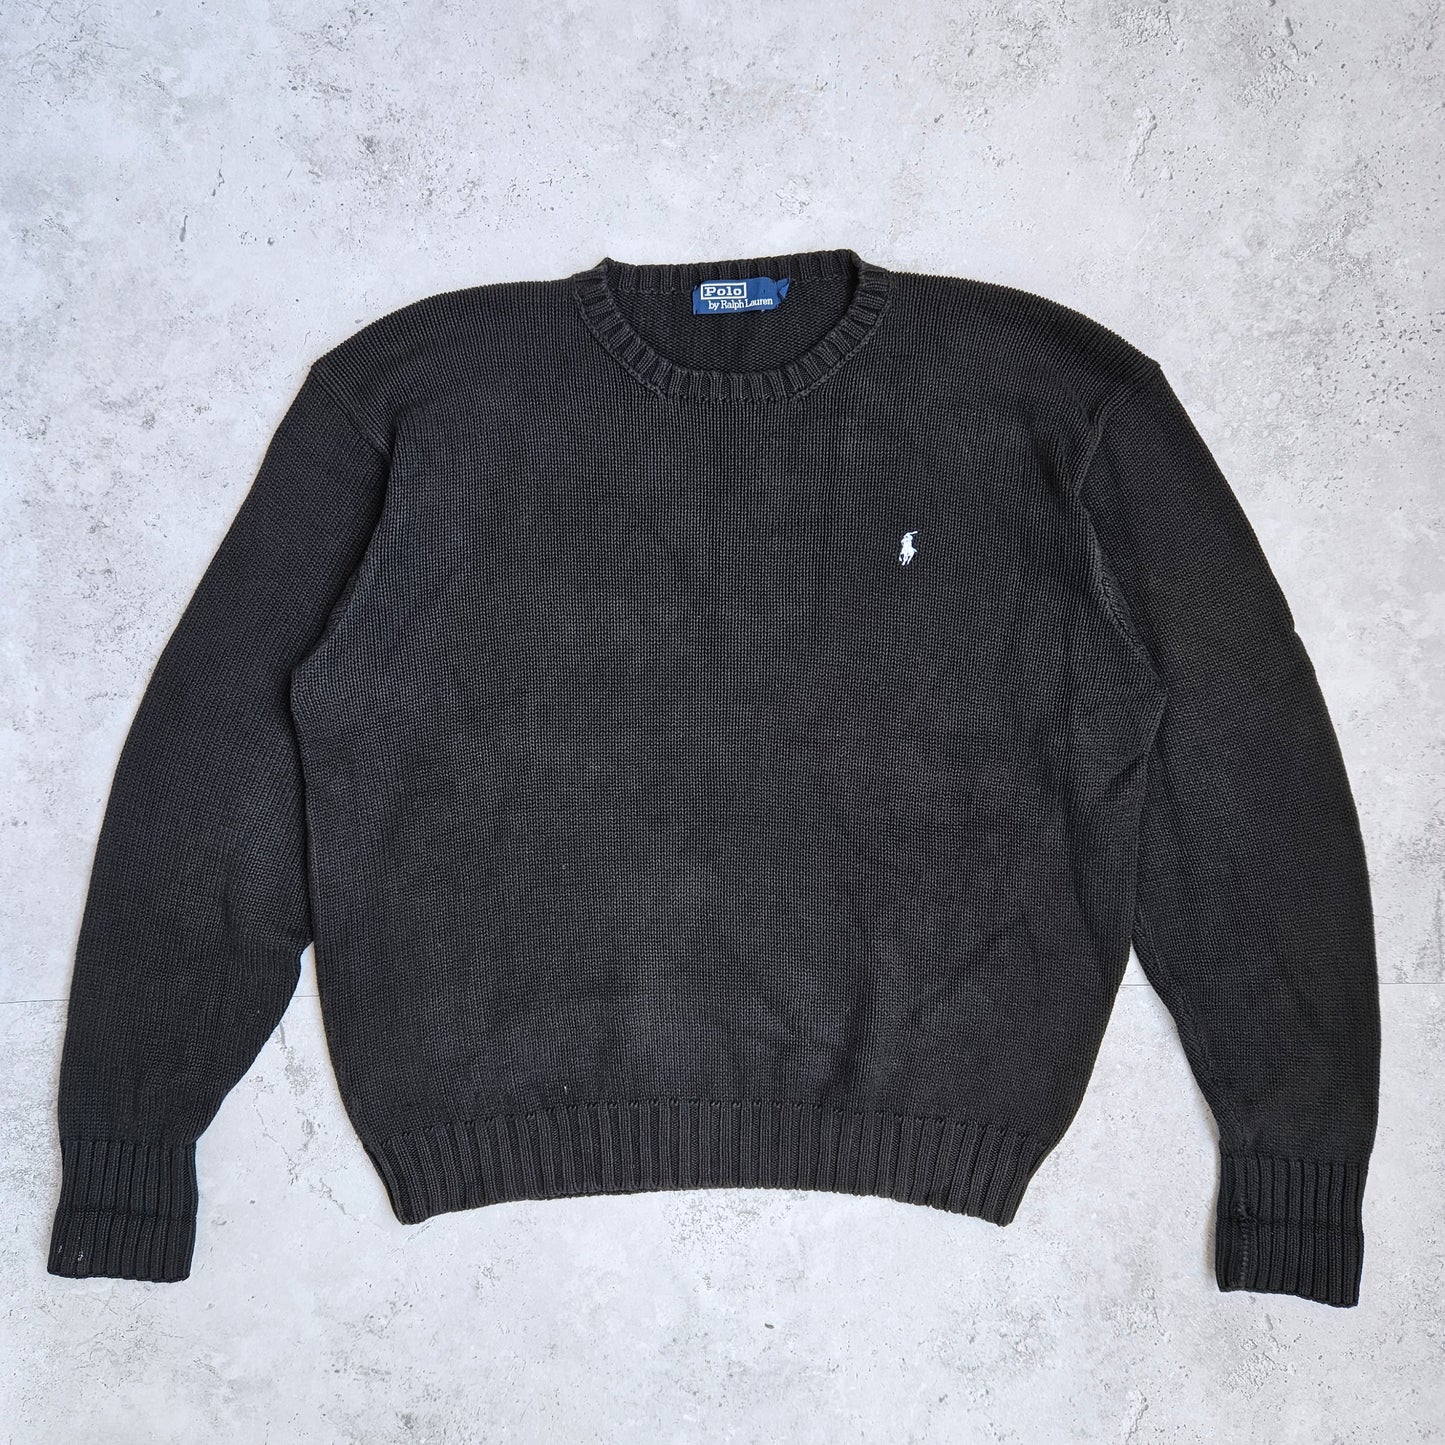 Vintage Polo Ralph Lauren Knitted Sweater (L)